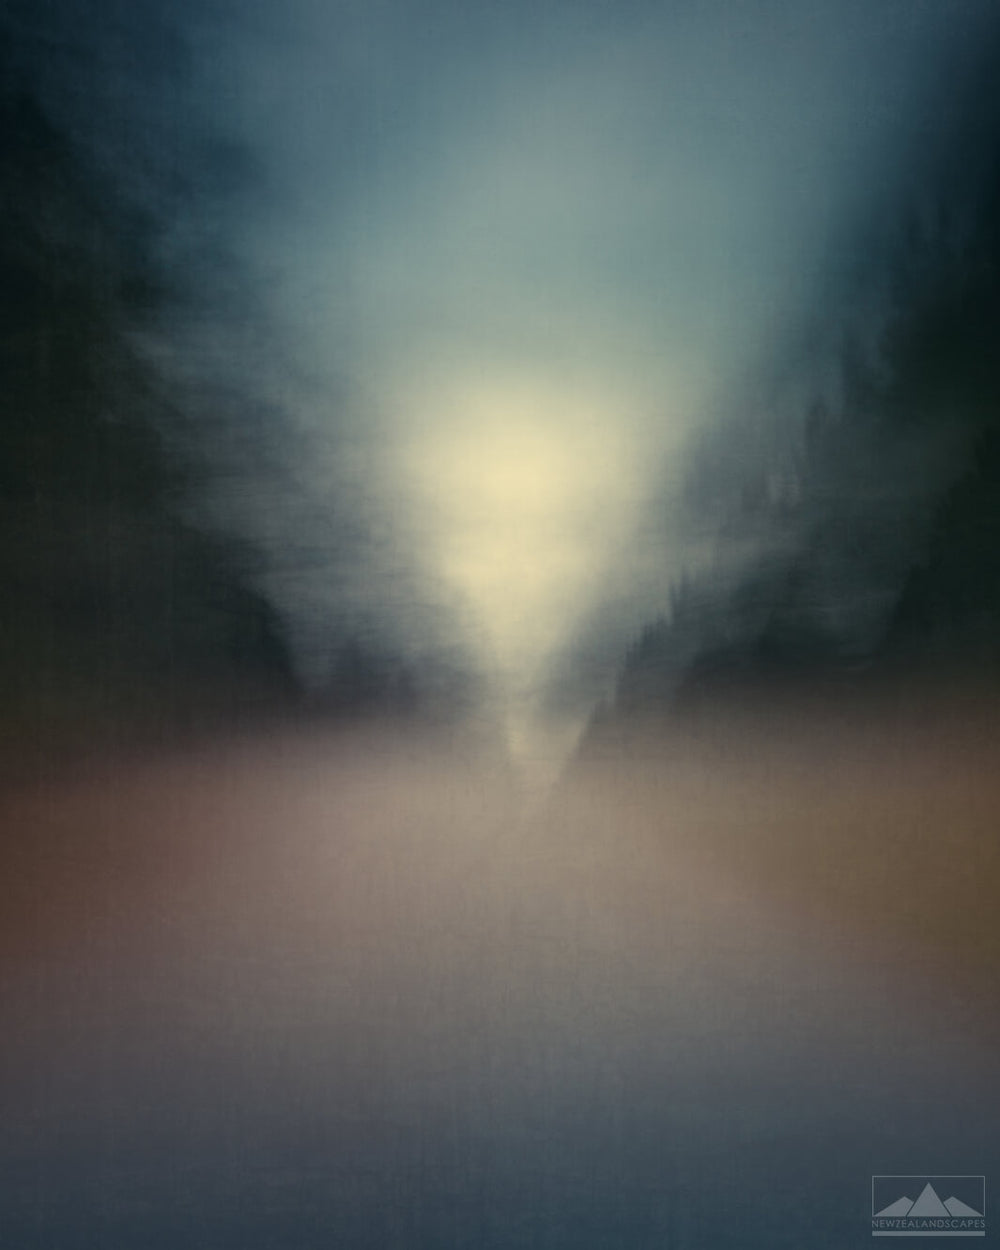 Abstract impressionist style blurred photo of a road inbetween trees, with sky and sunlight in the distance.